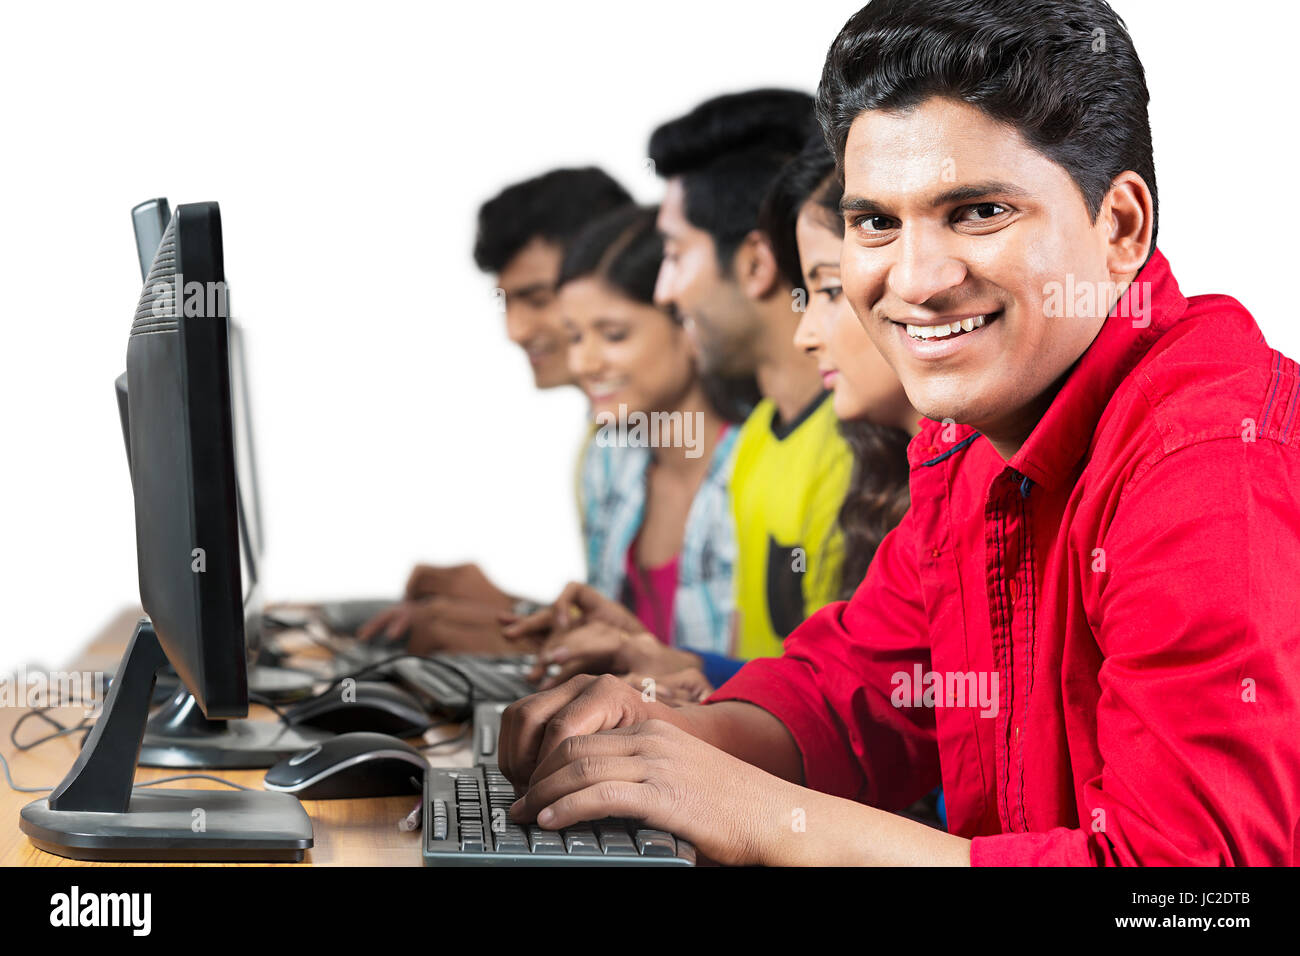 Young Man College Student Computer Lab Studying Stock Photo